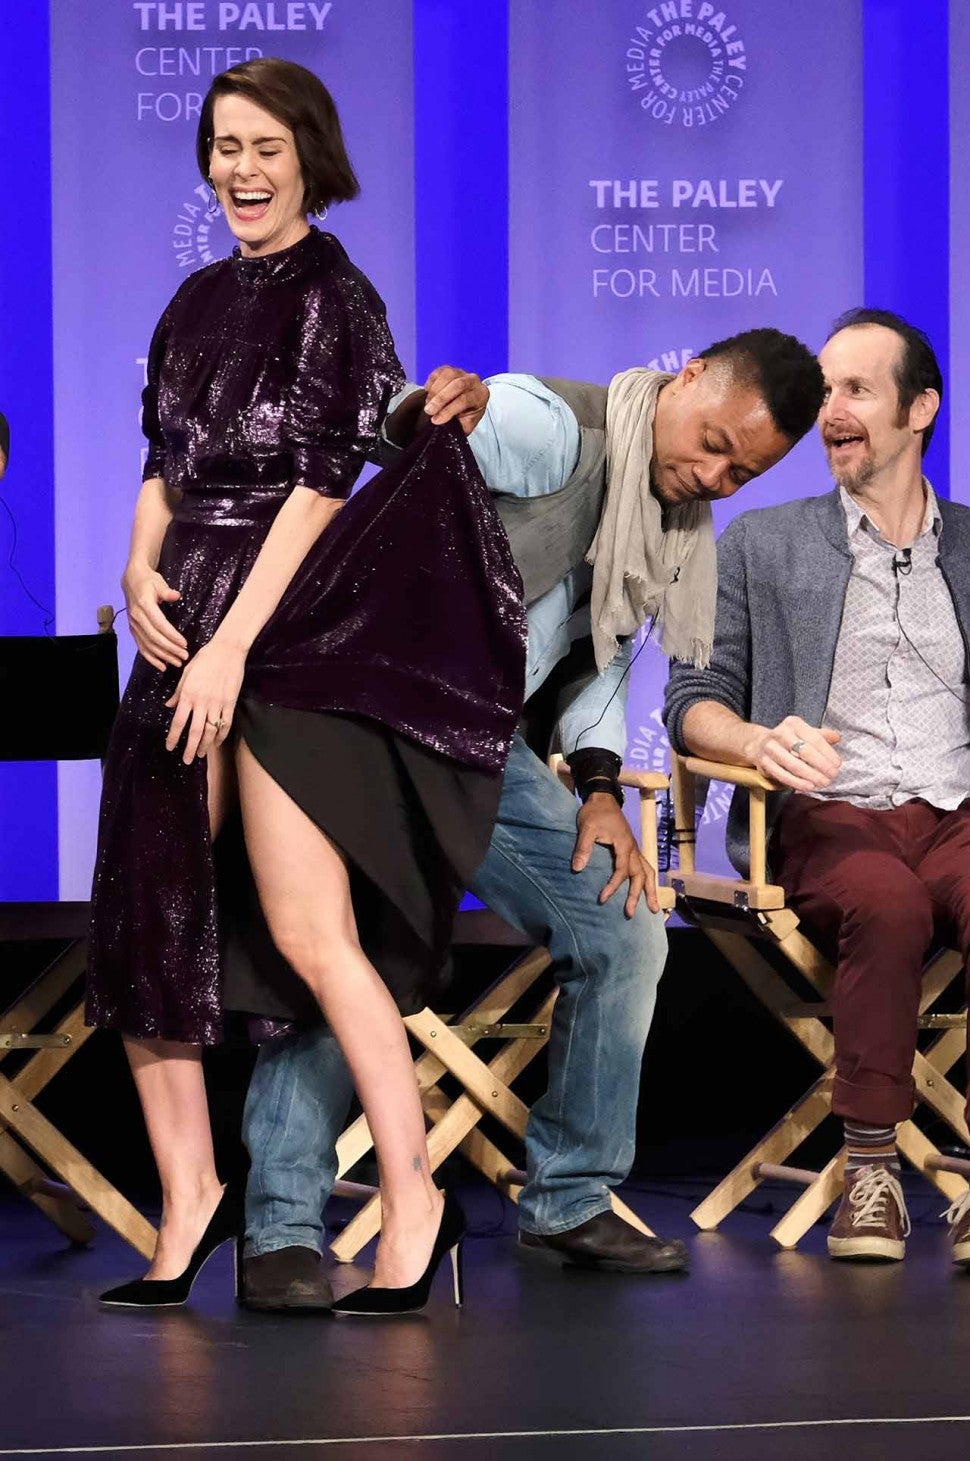 EXCLUSIVE: Your Favorite TV Stars Pose for Photos at PaleyFest